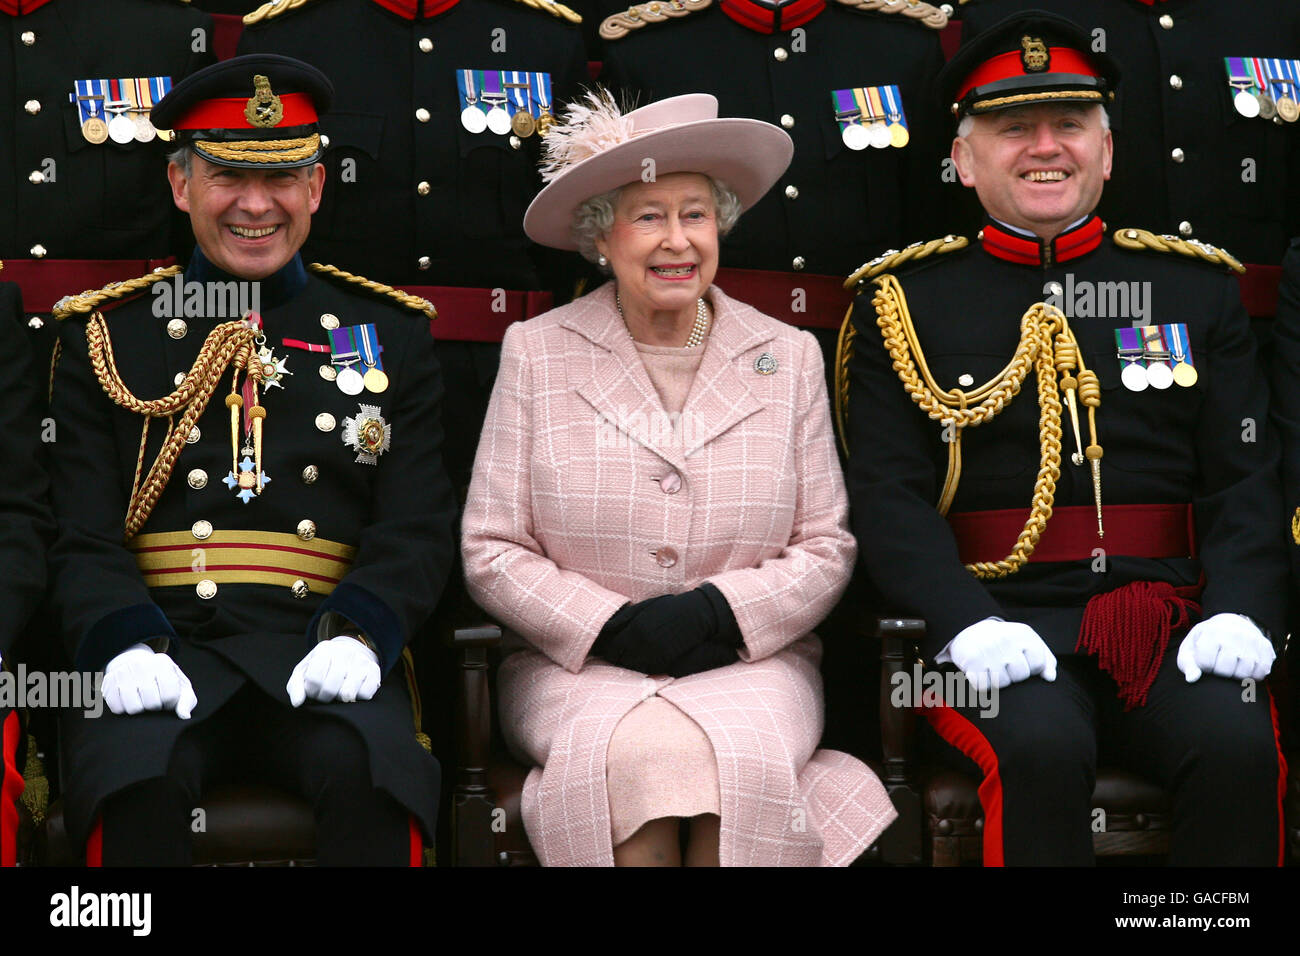 Great Britain's Queen Elizabeth II poses for a photograph, accompanied by Chief Royal Engineer Sir Kevin O'Donoghue (left) and Brigadier Chris Sexton during a visit to the Corps of Royal Engineers at Brompton Barracks, Chatham, Kent. Stock Photo